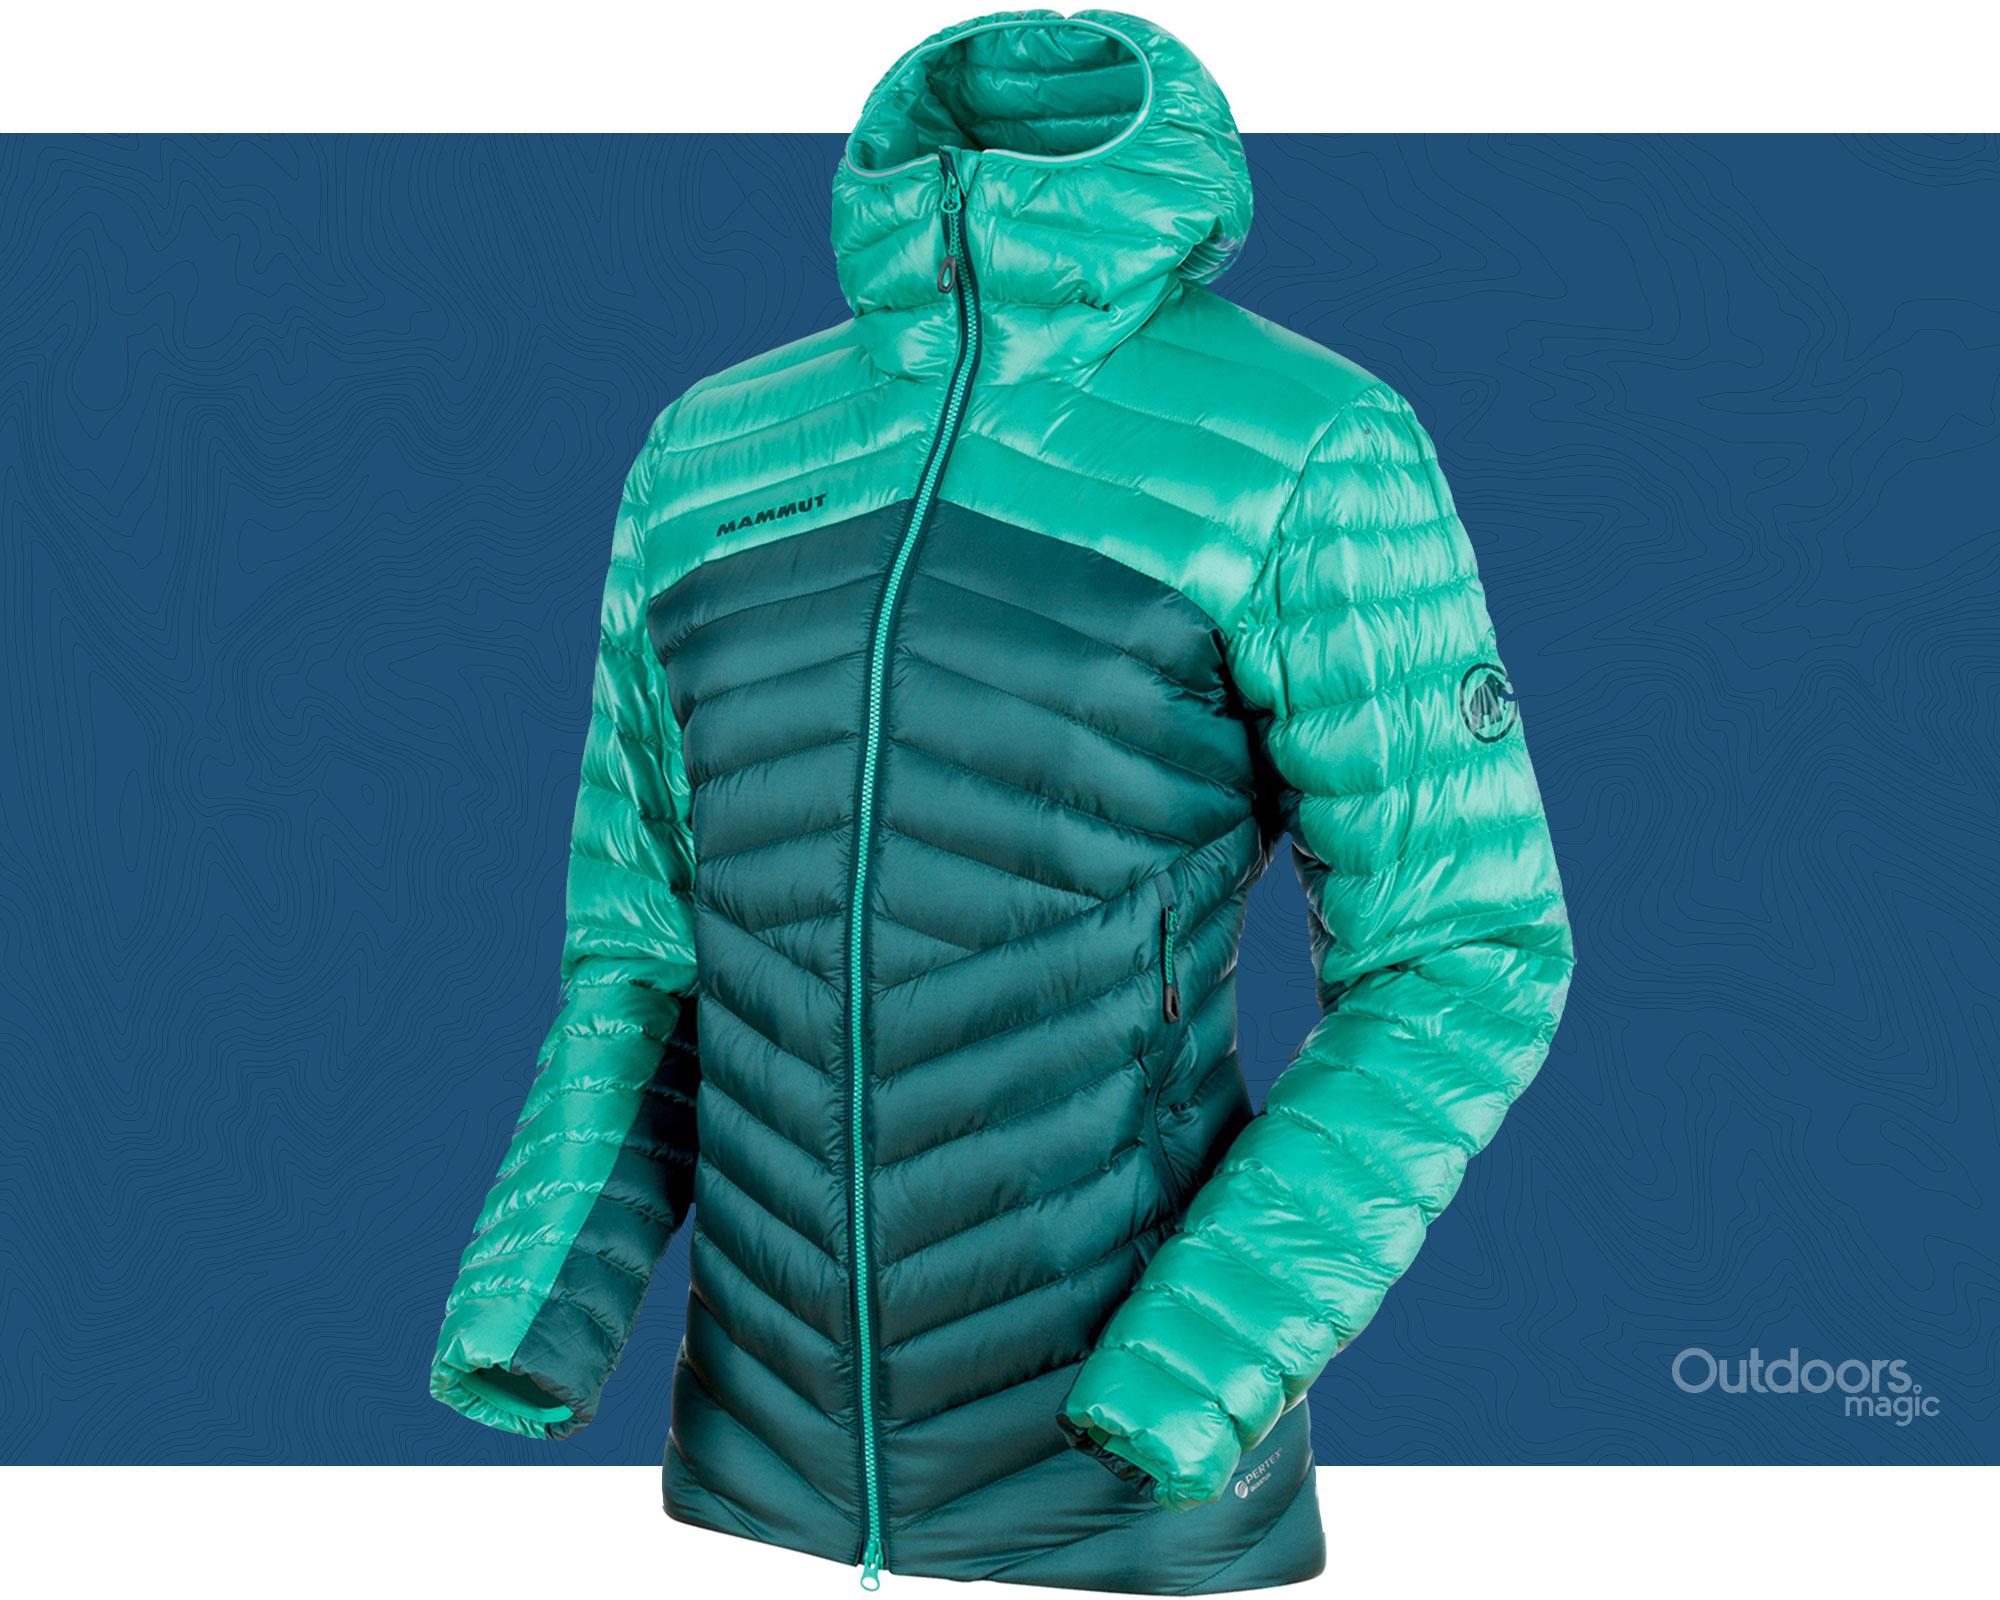 11 Best Down Jackets for Women to Keep You Warm